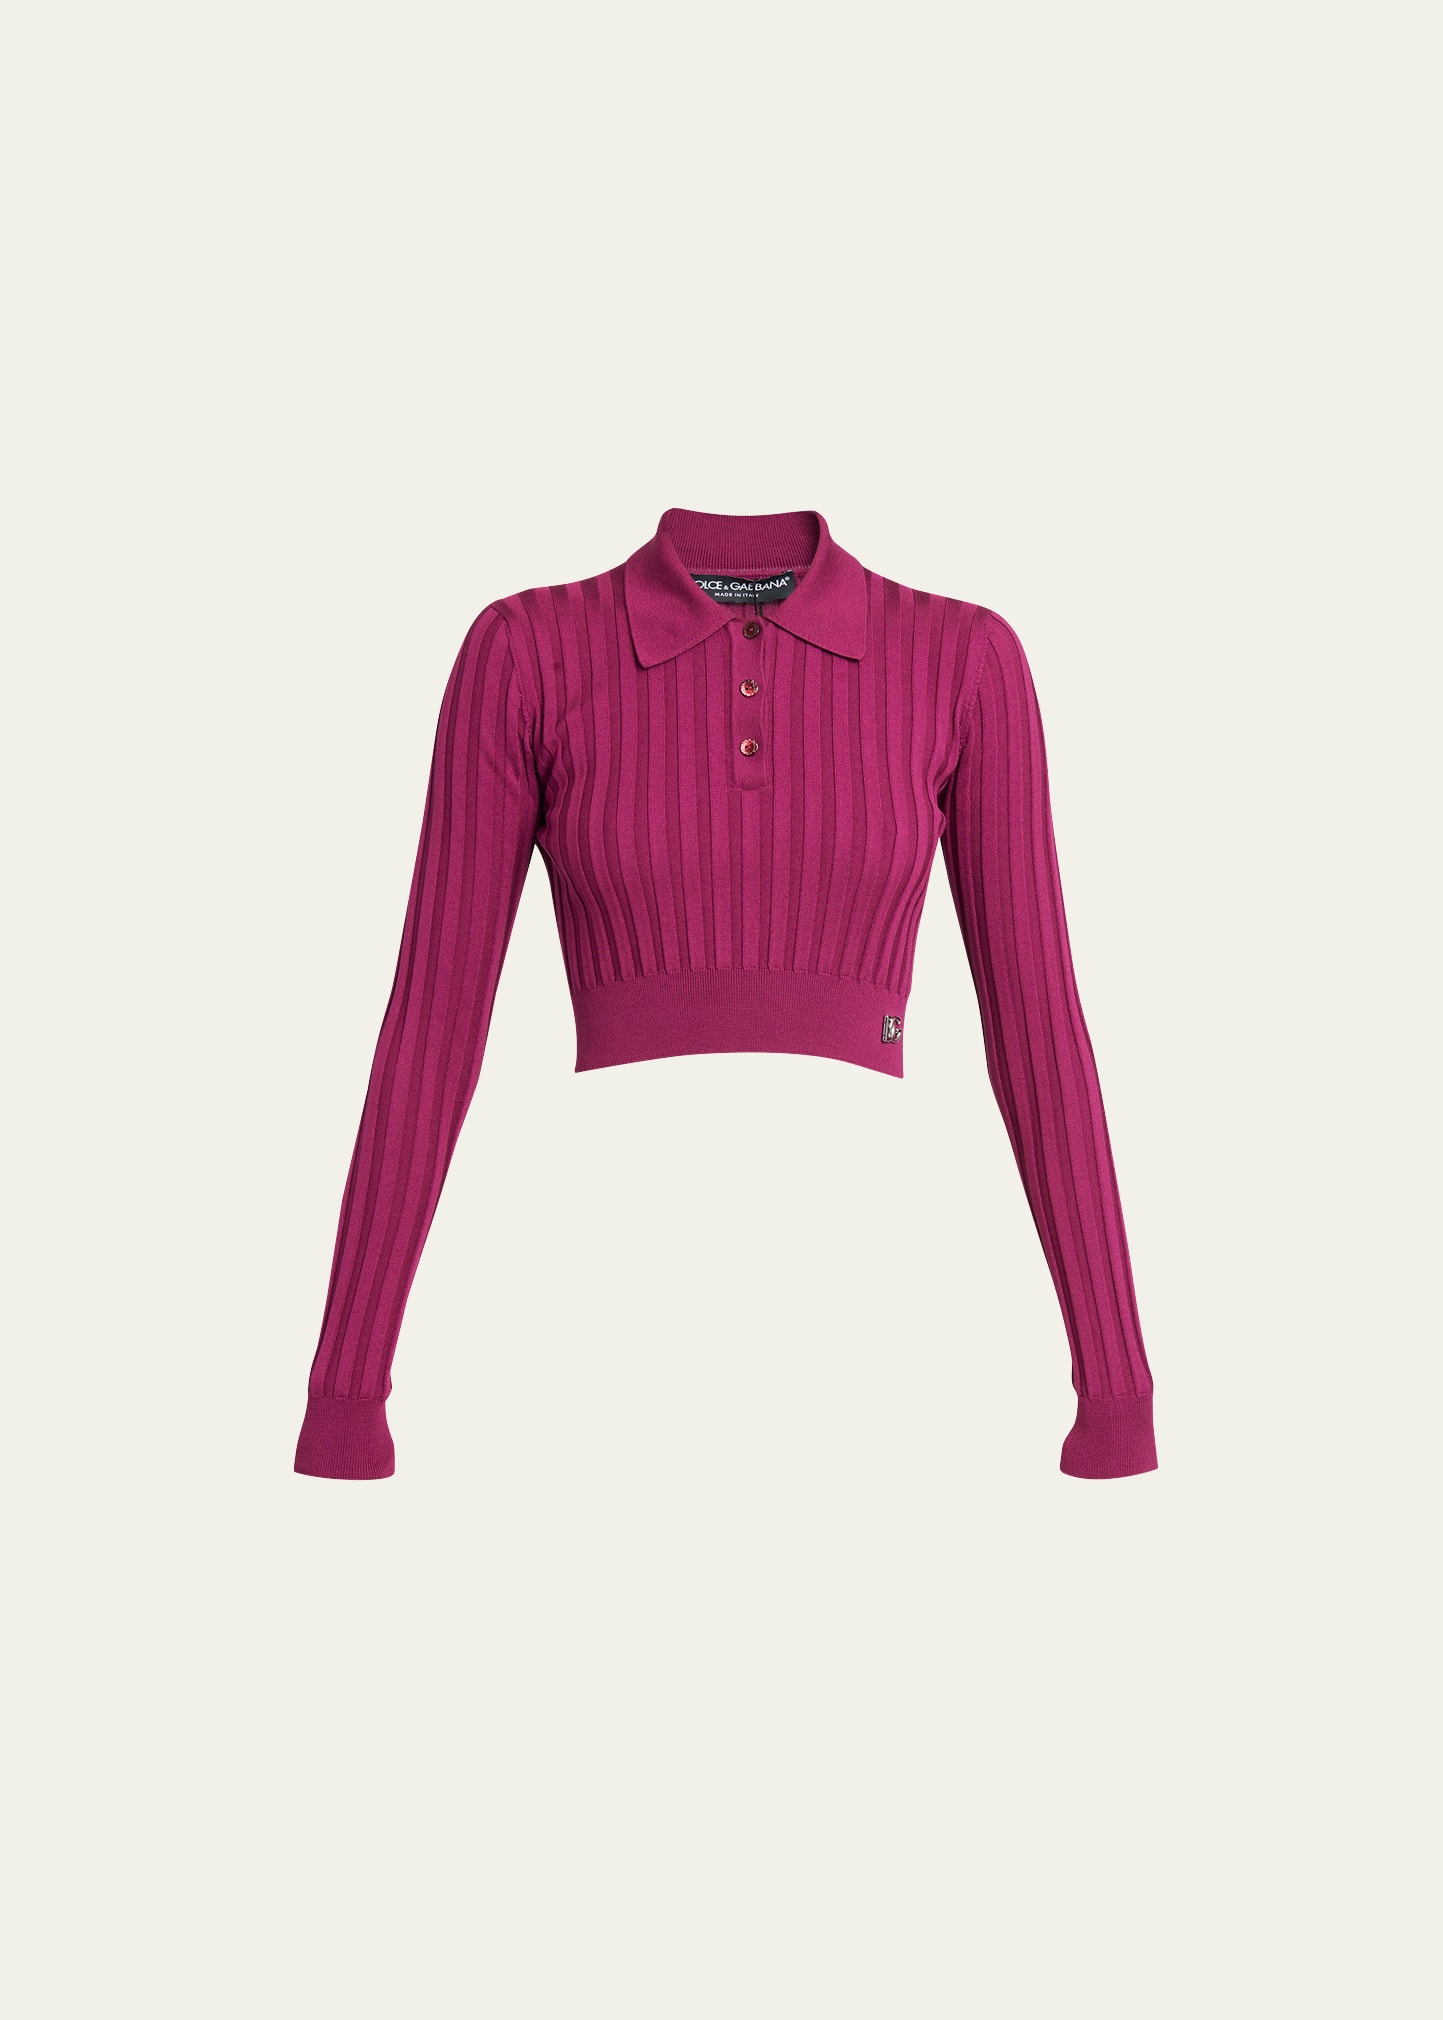 DOLCE & GABBANA CROPPED KNIT POLO TOP WITH LOGO DETAIL